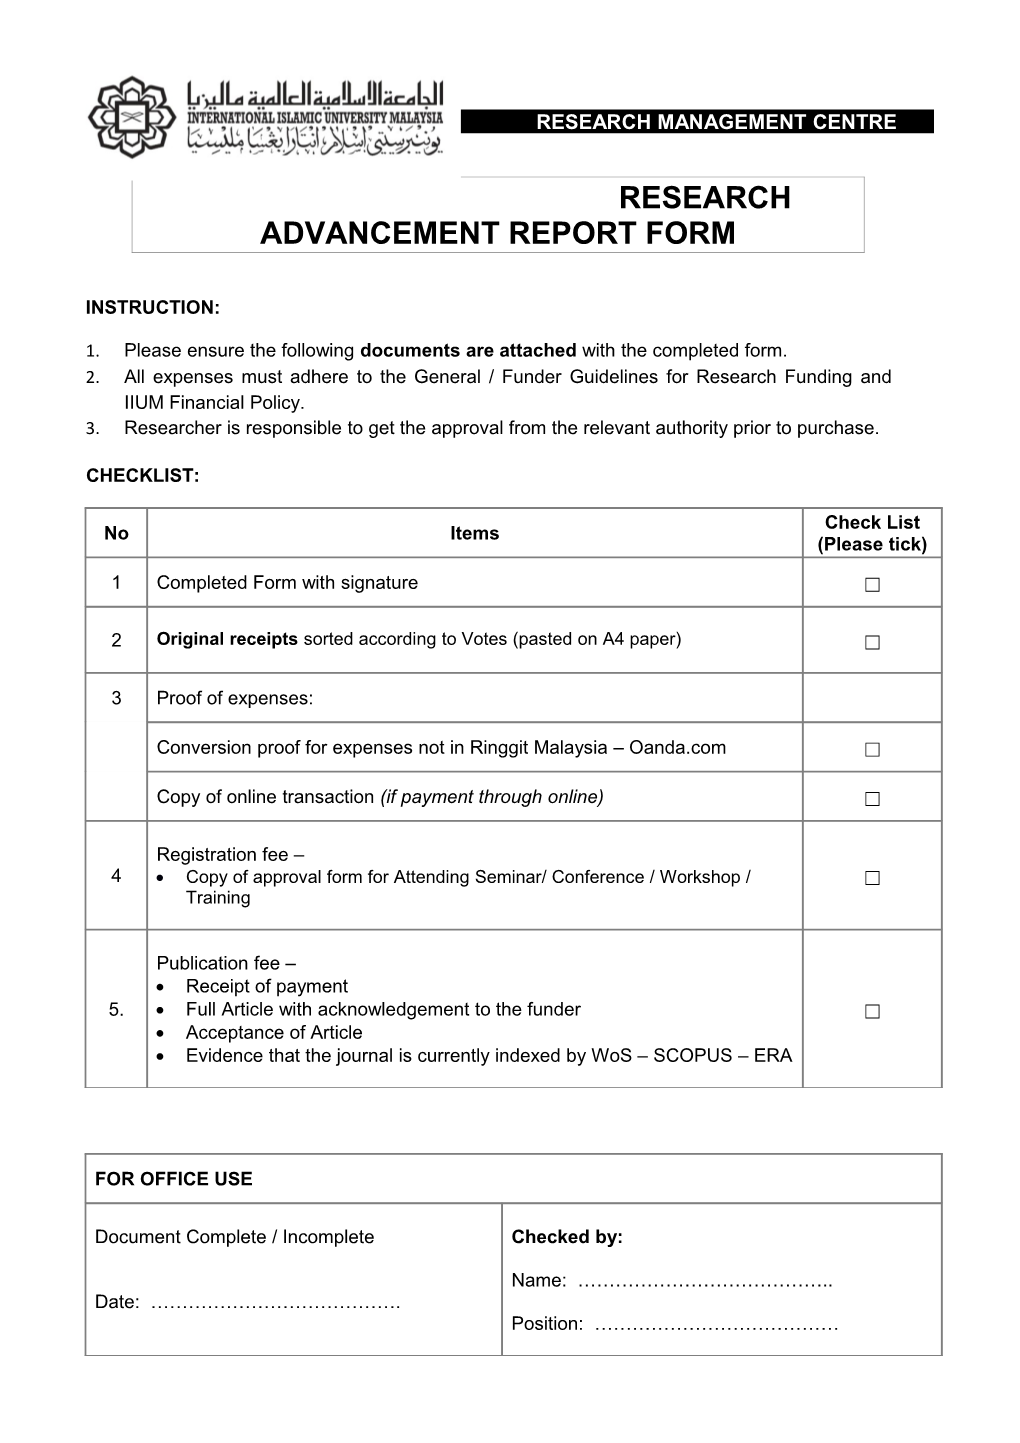 Research Advancement Report Form